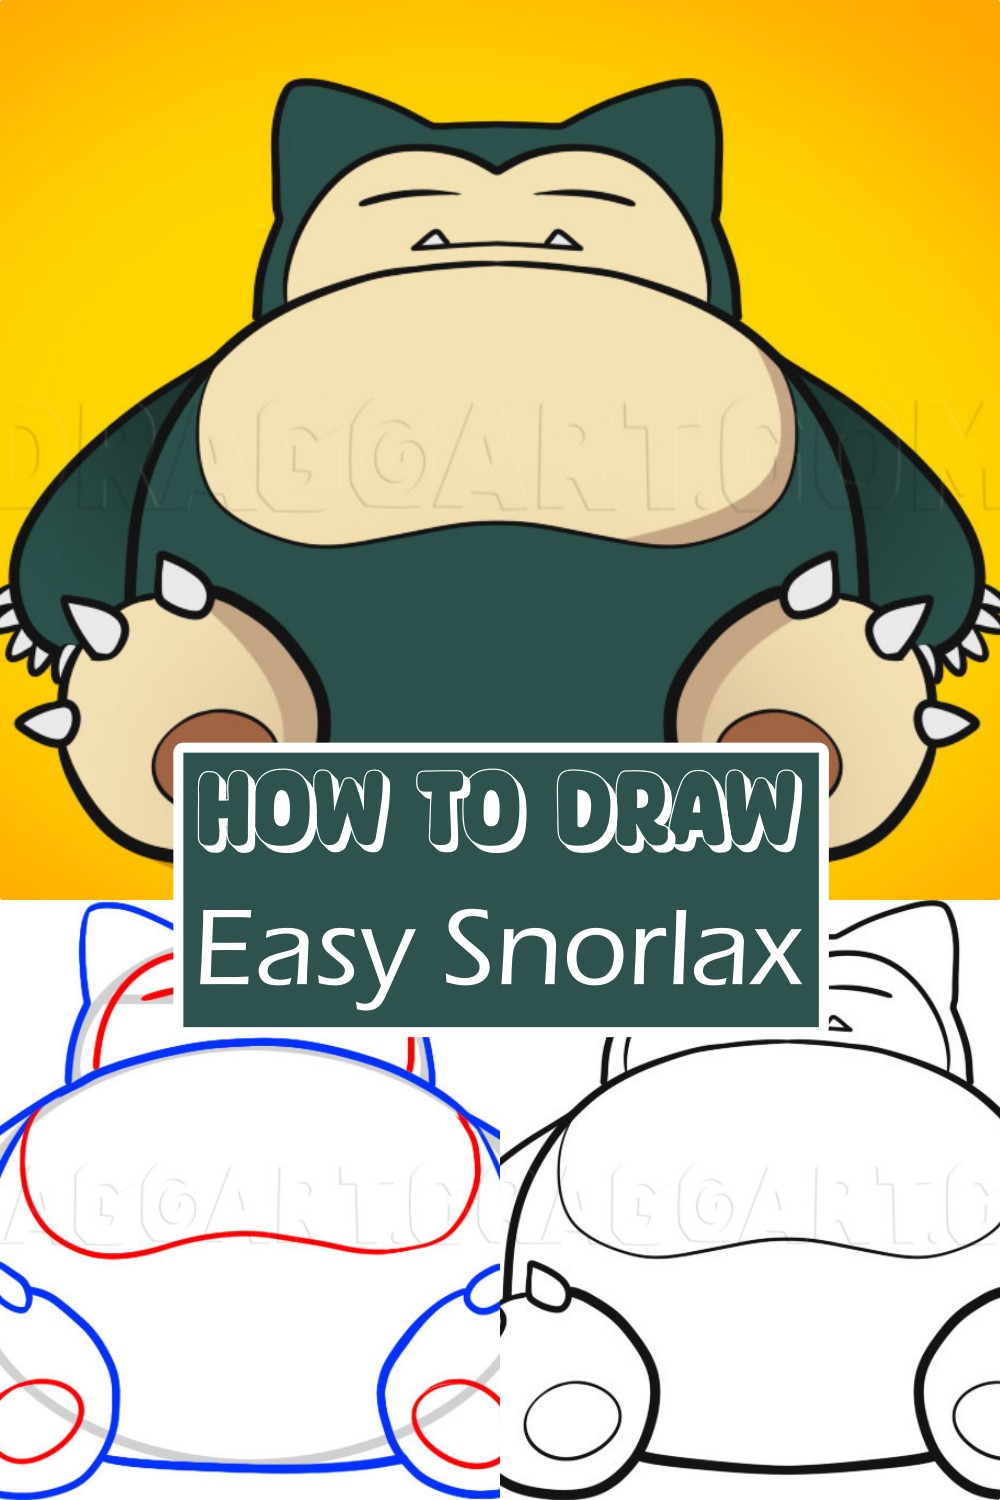 How To Draw Easy Snorlax